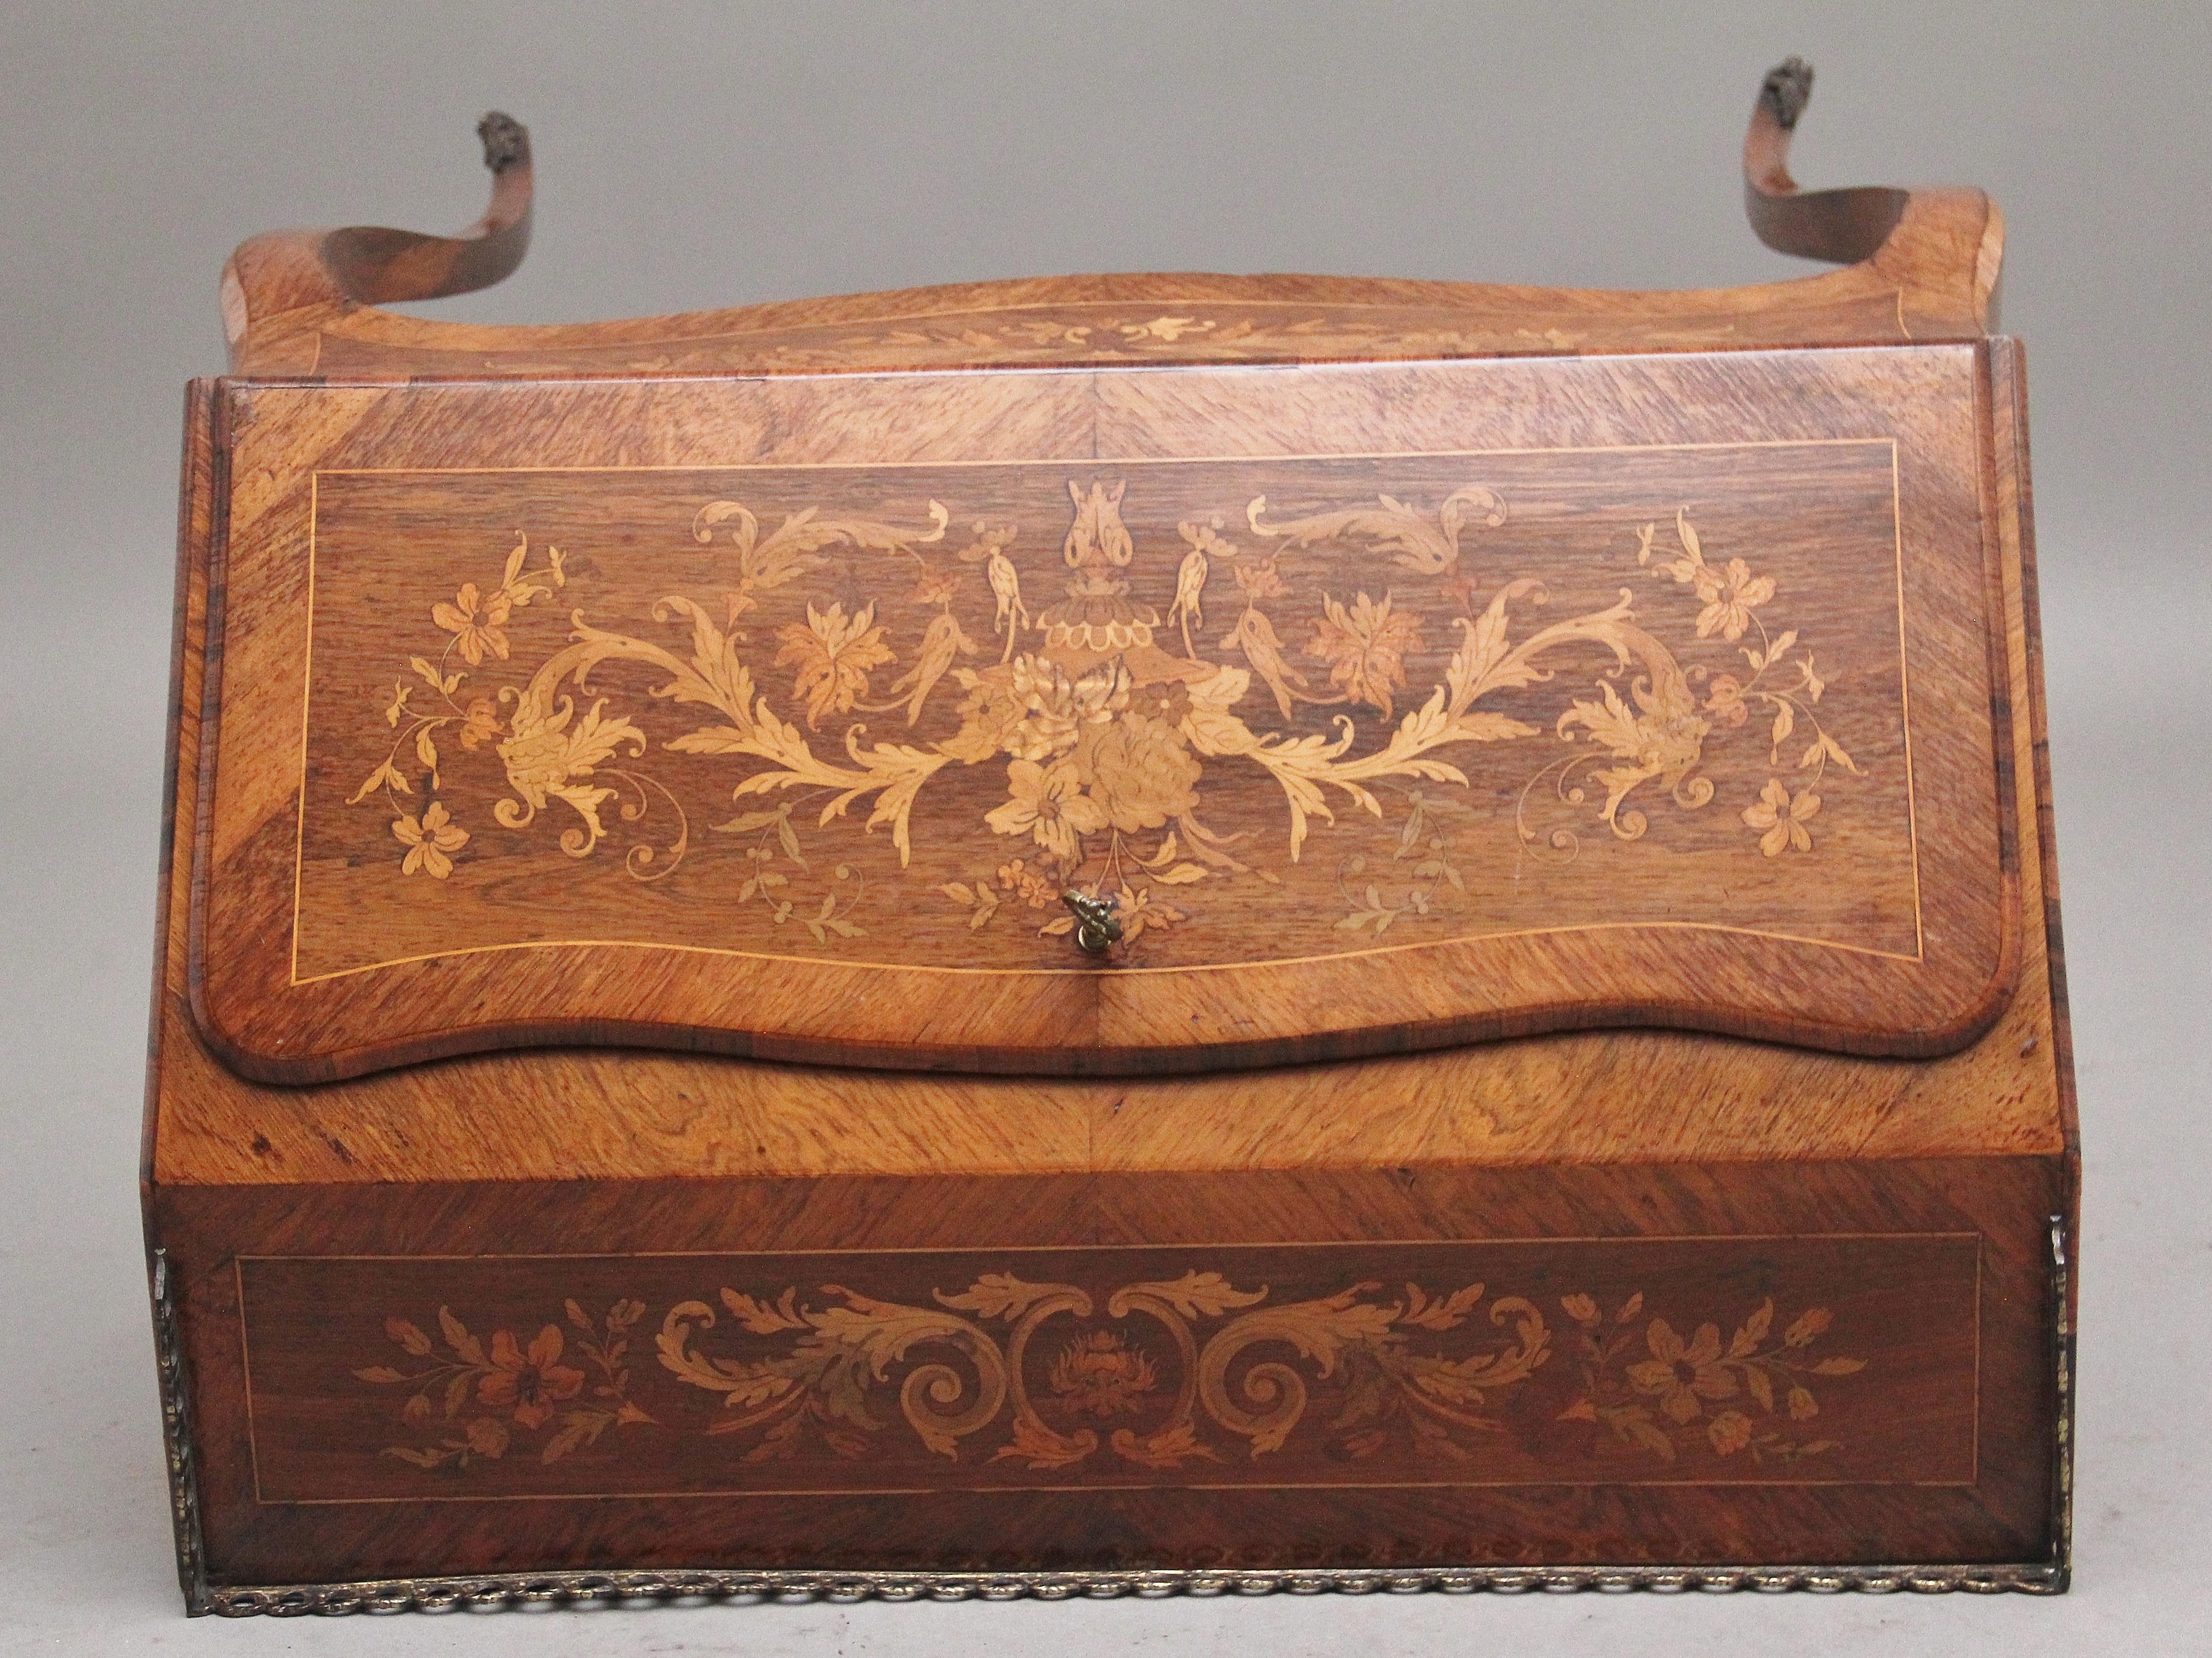 Superb Quality Freestanding 19th Century Kingwood and Marquetry Inlaid Bureau For Sale 7